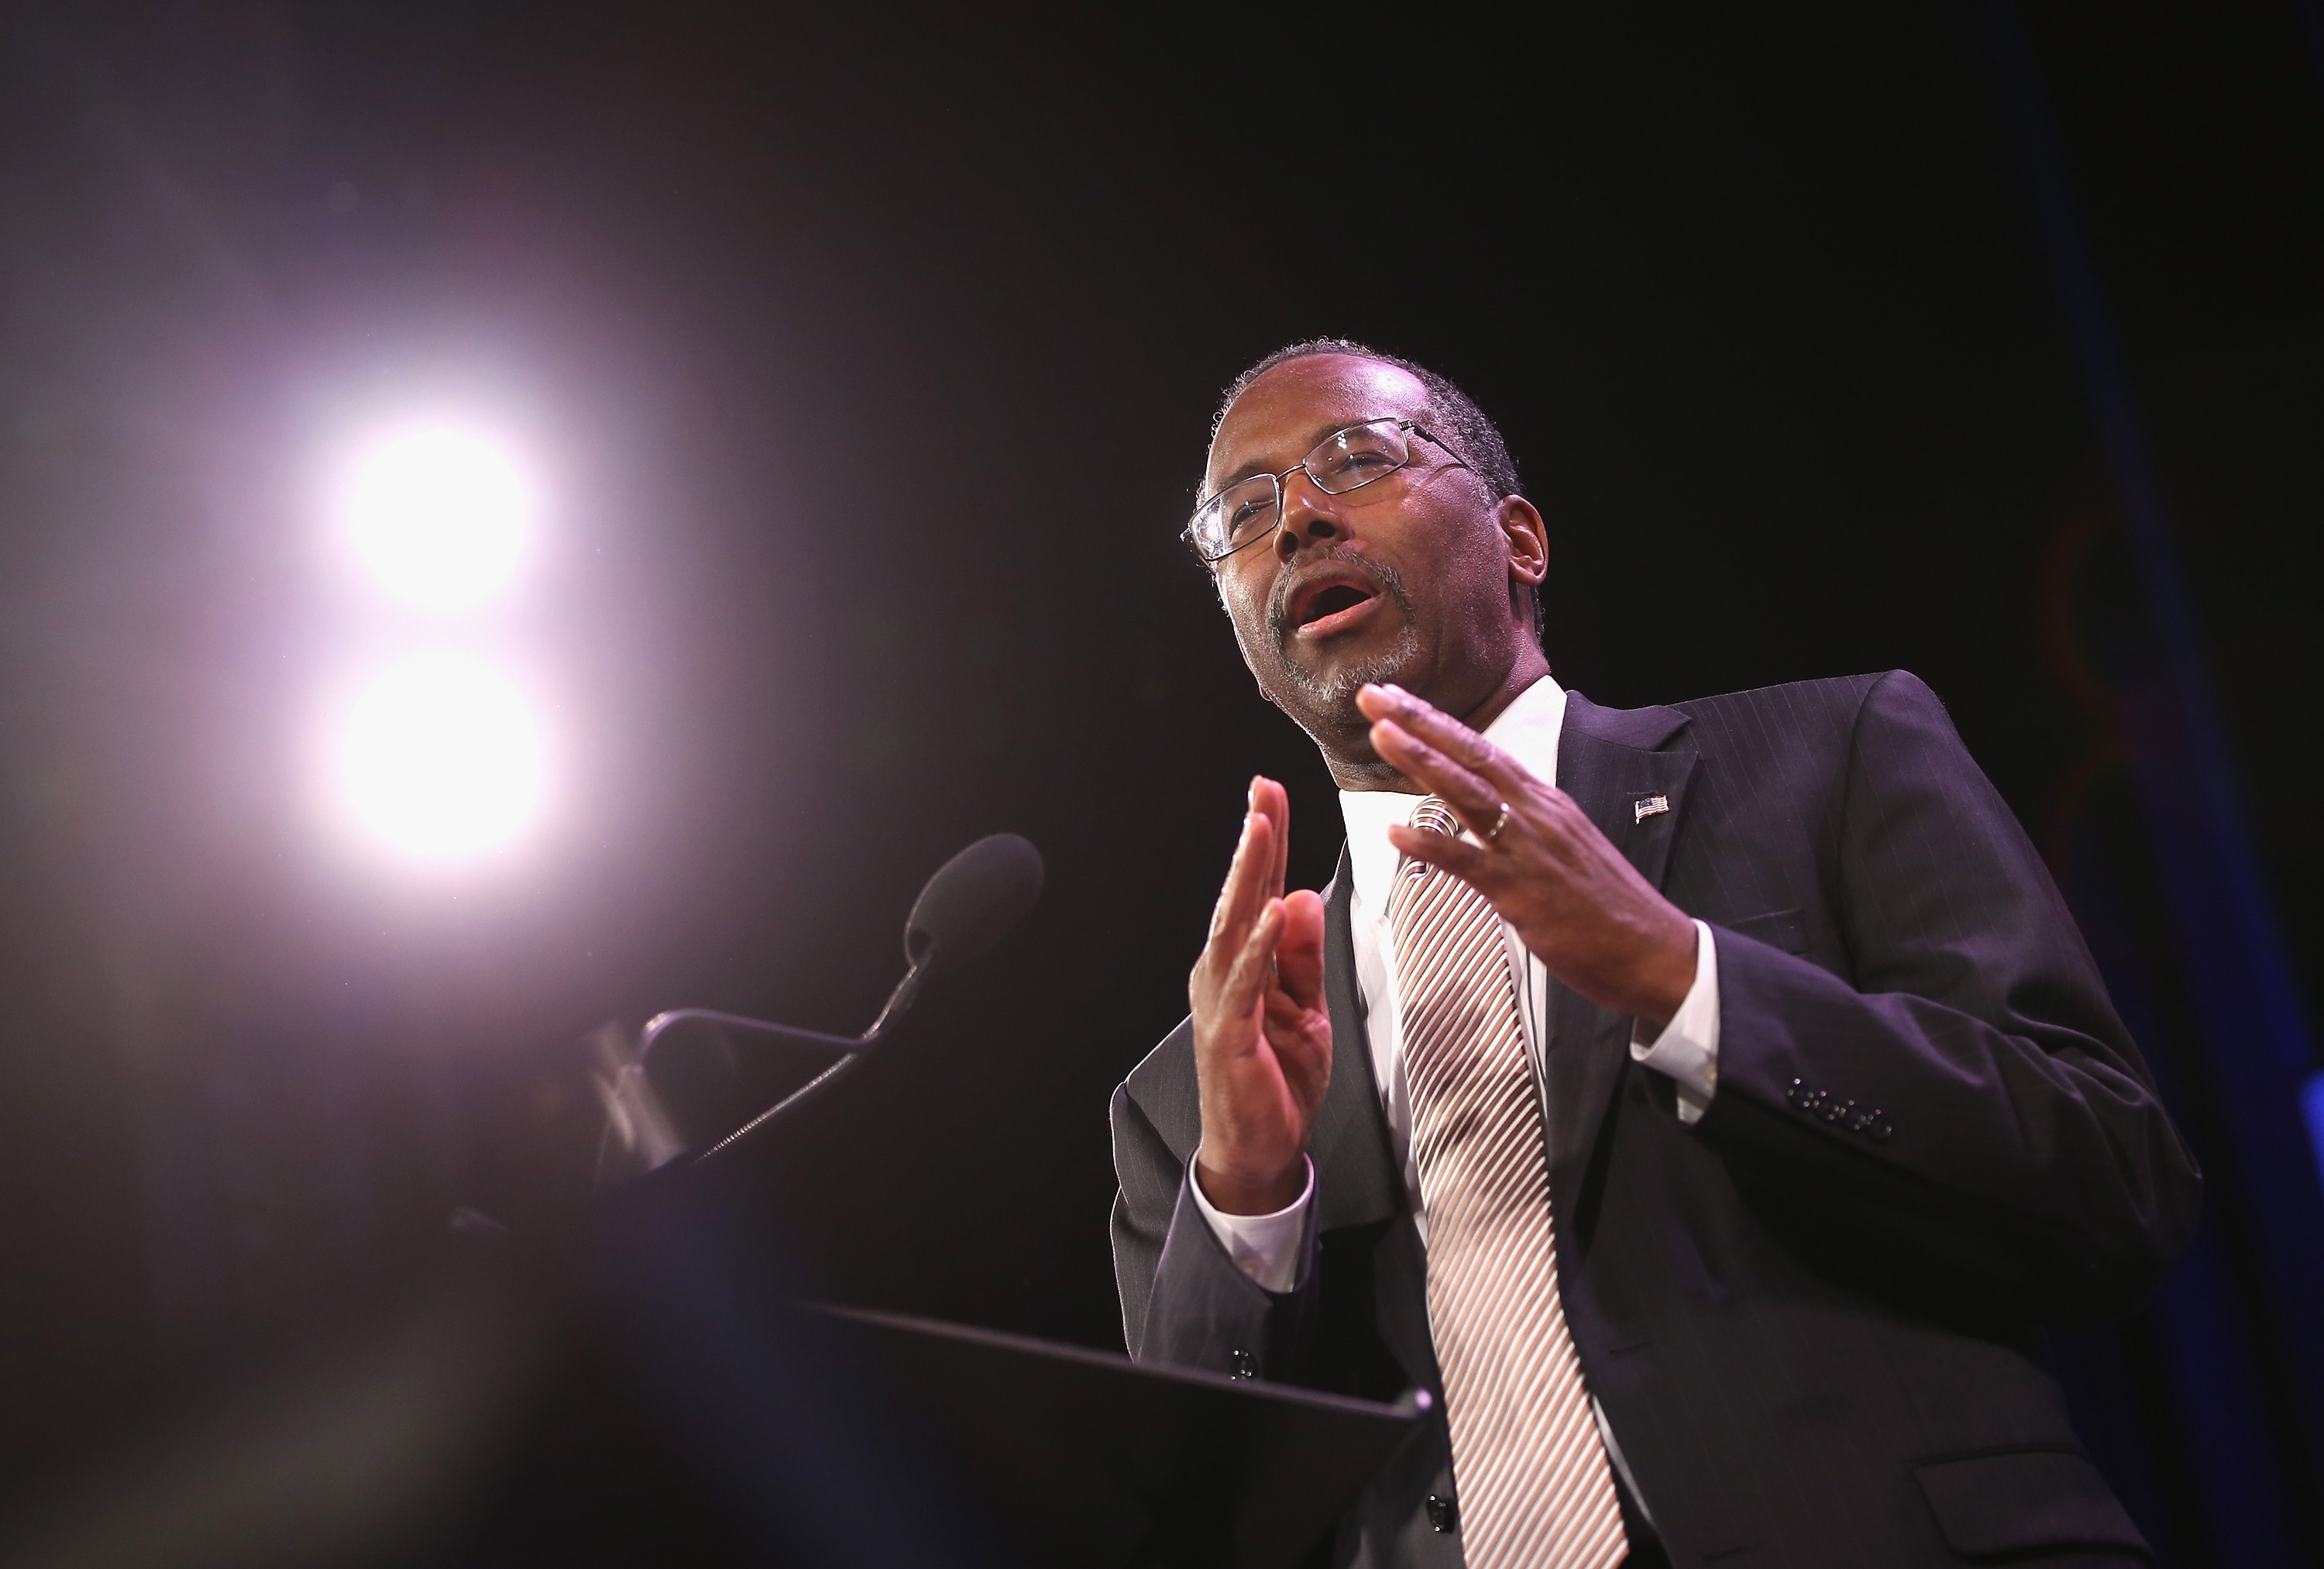 Ben Carson thinks gay people can choose to be straight because men have sex in prison. He "apologized."